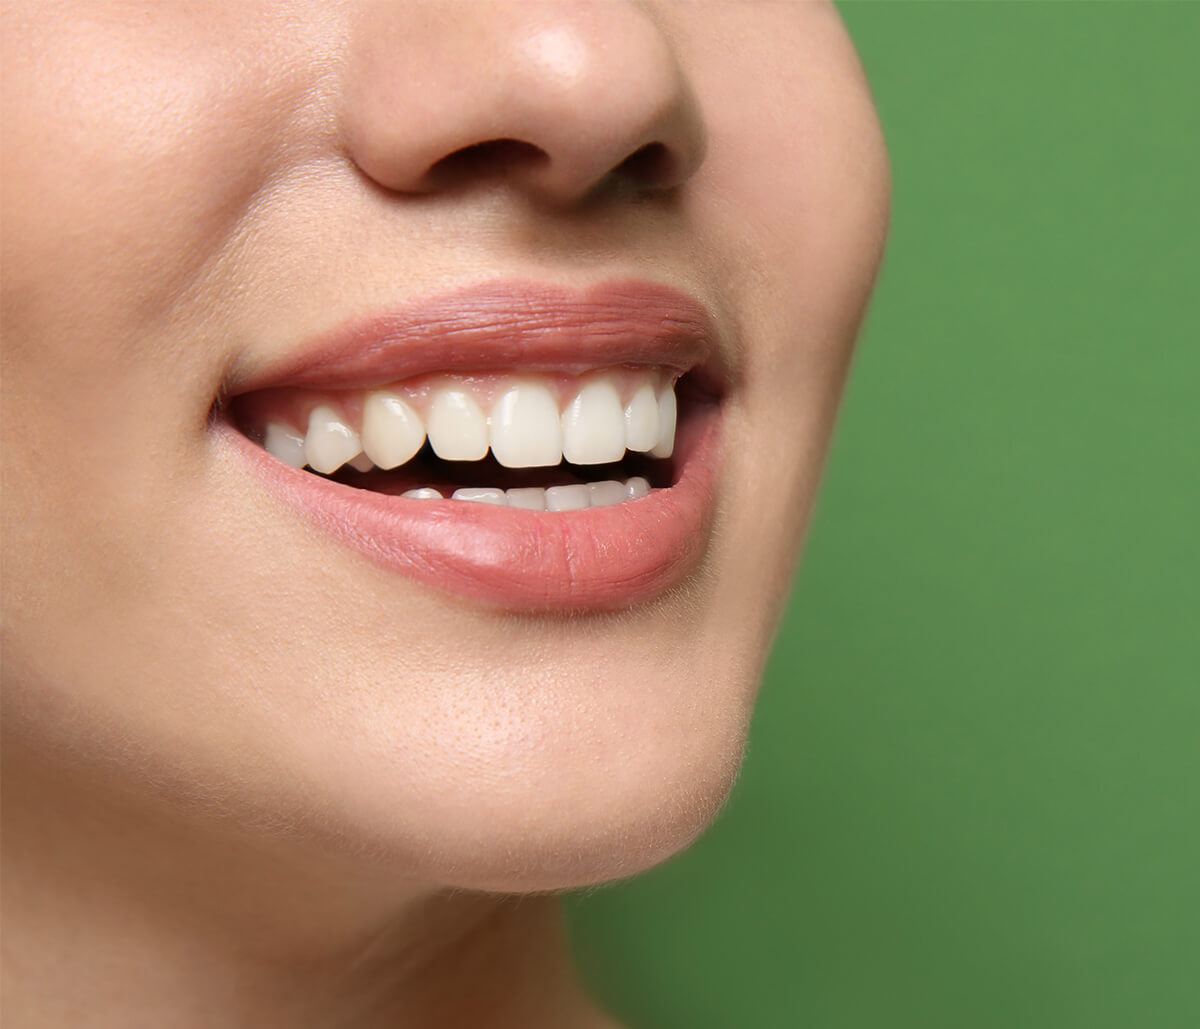 How Can I Improve My Smile with Cosmetic Dentistry?